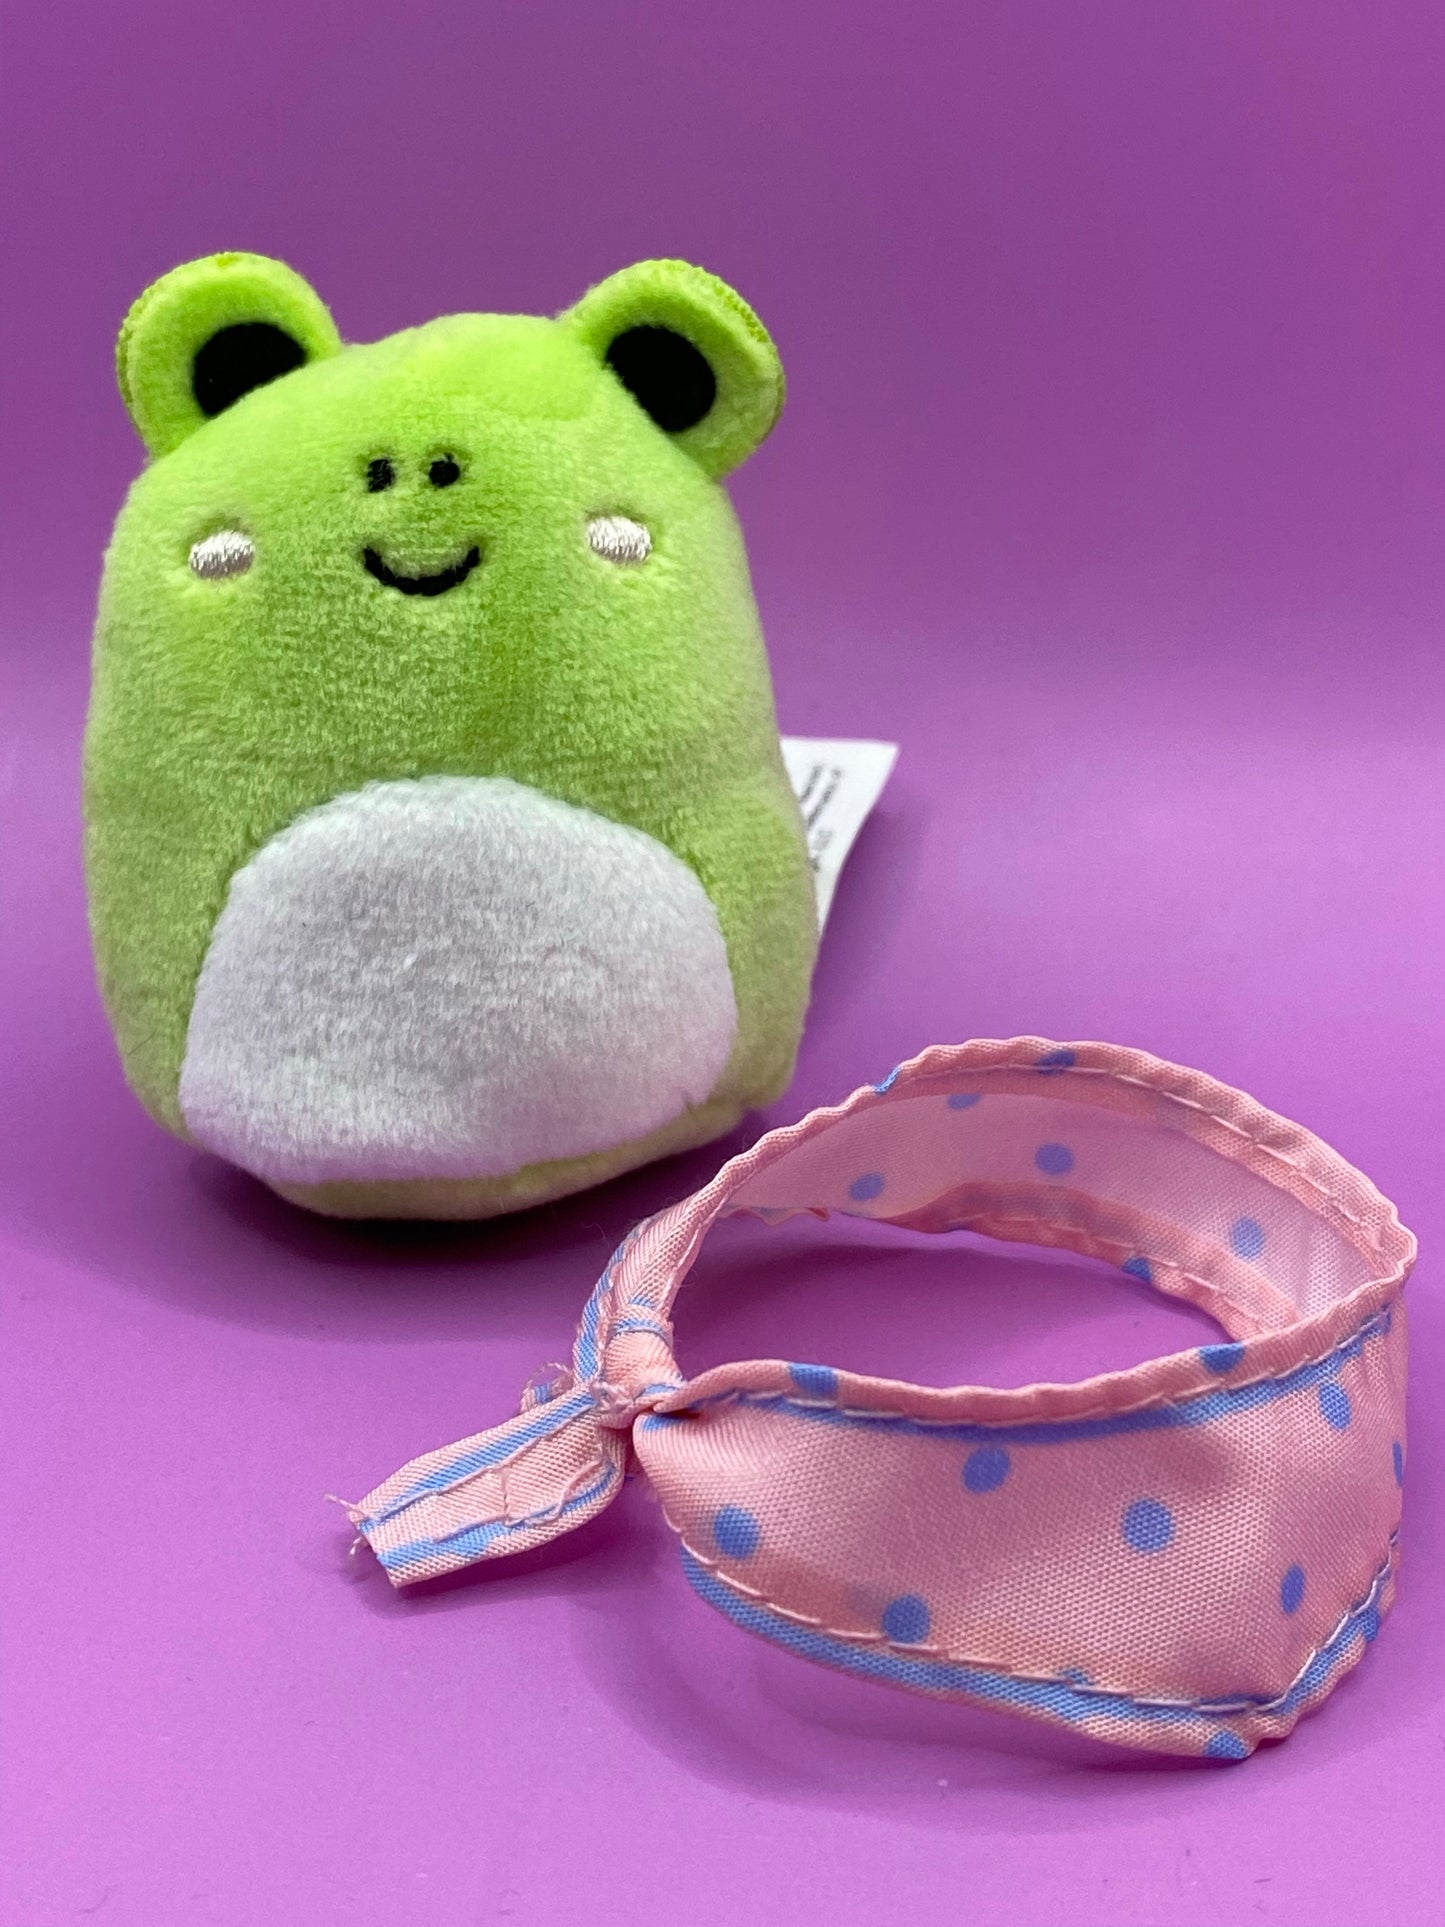 RARE ~ Green Frog with Pink Bandana ~ 2" Individual Squishville by Squishmallows ~ LIMIT 1 PER CUSTOMER